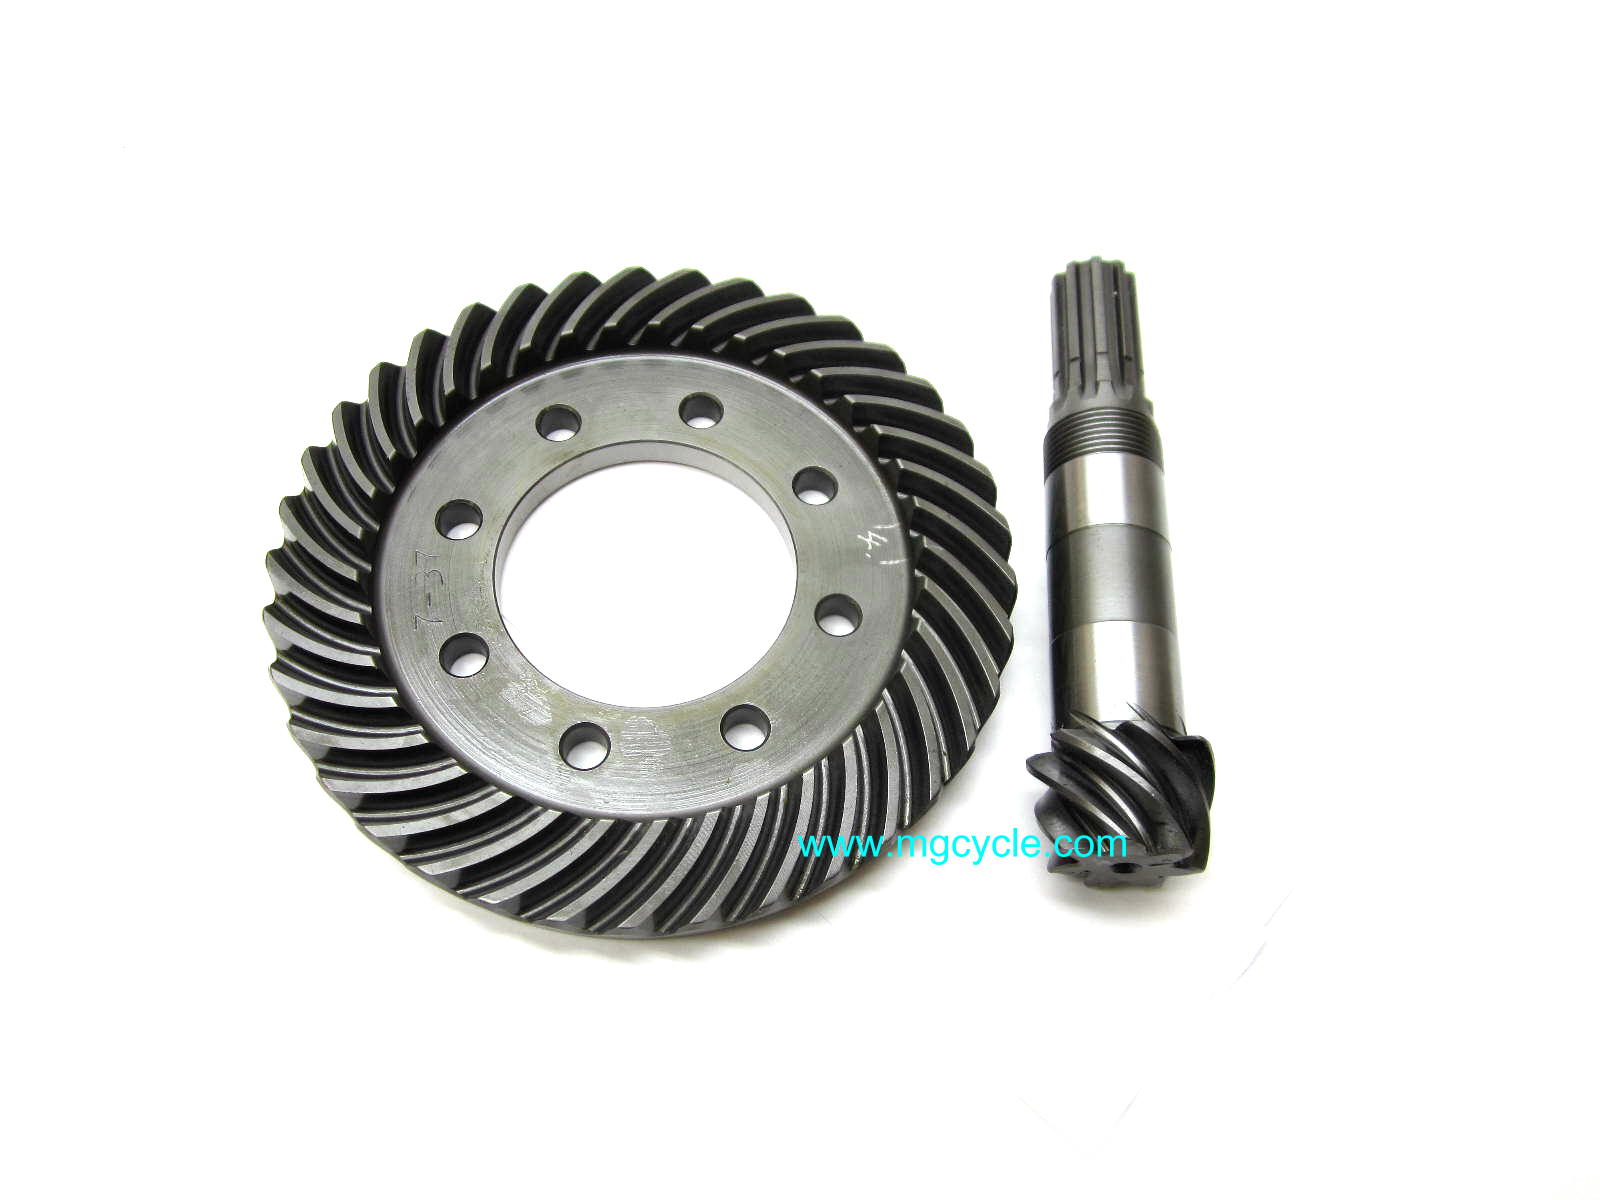 7-37 sidecar ring and pinion gear set